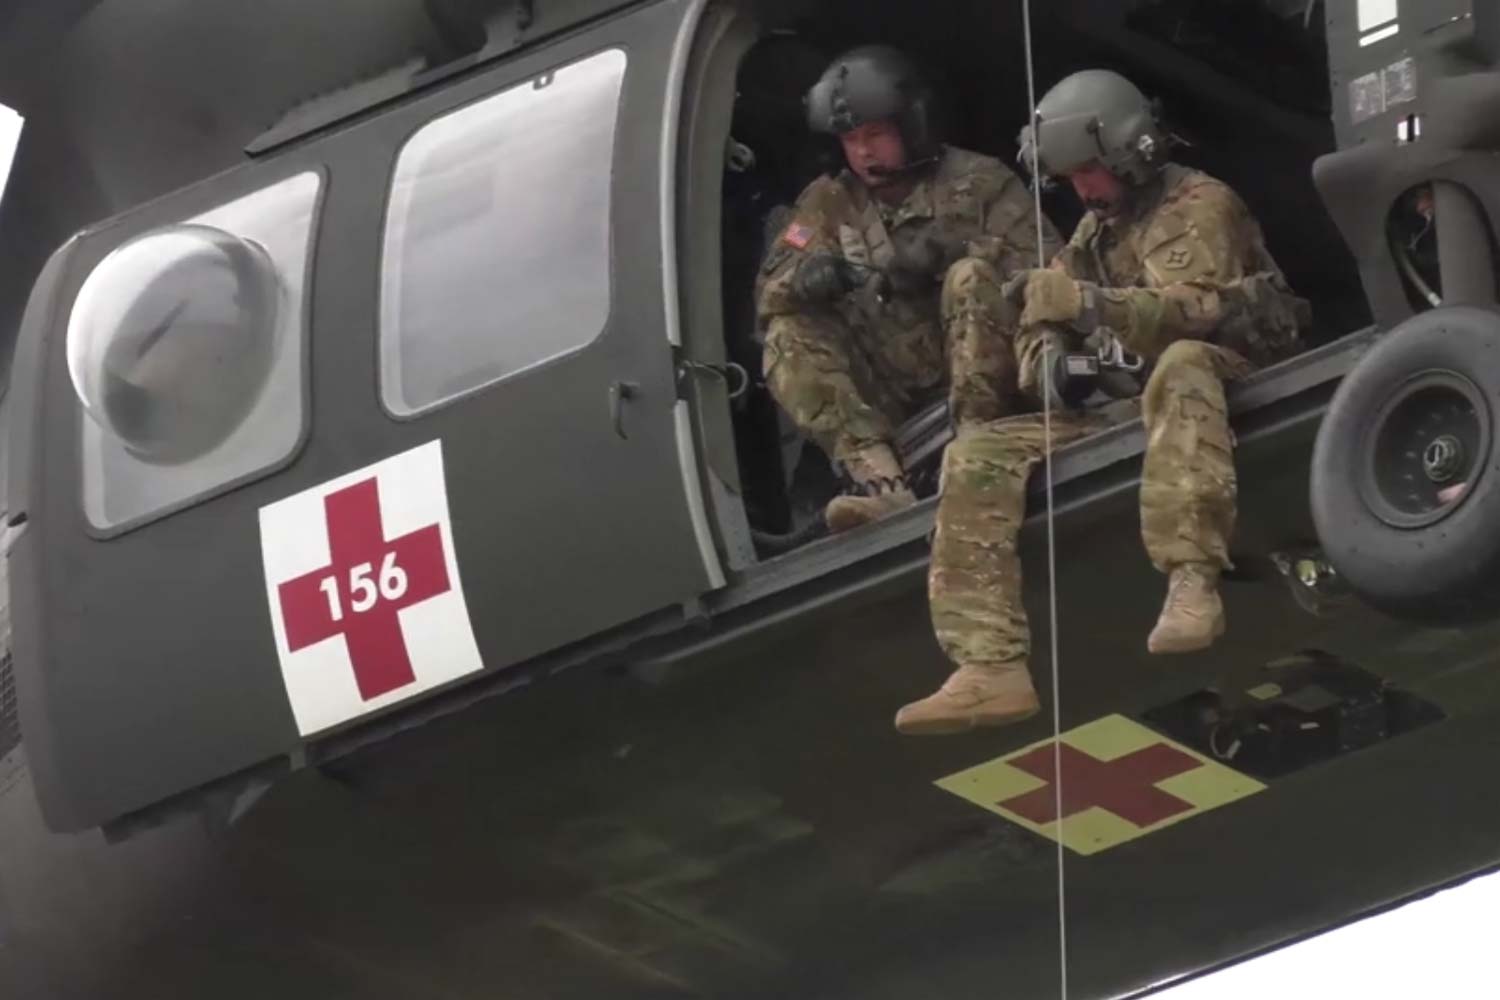 repelling out of a helicopter